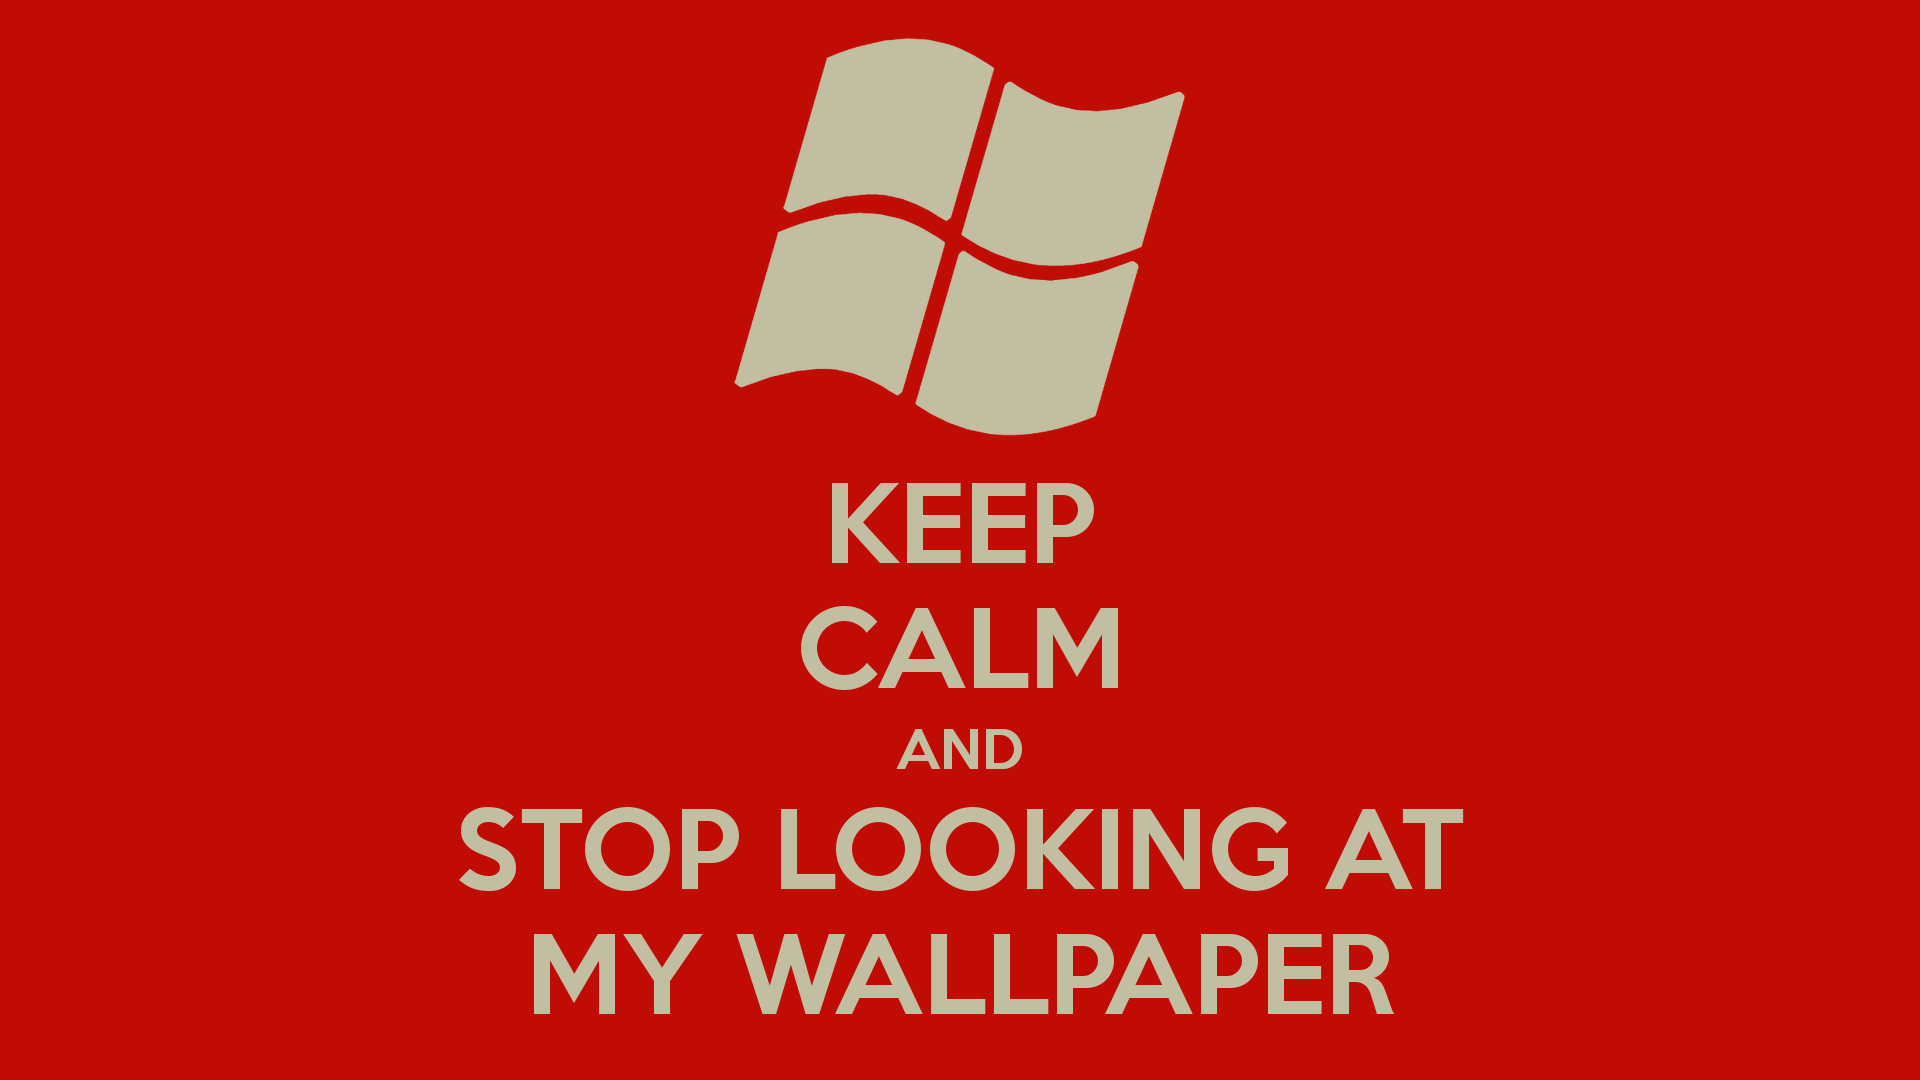 keep calm and read on wallpaper